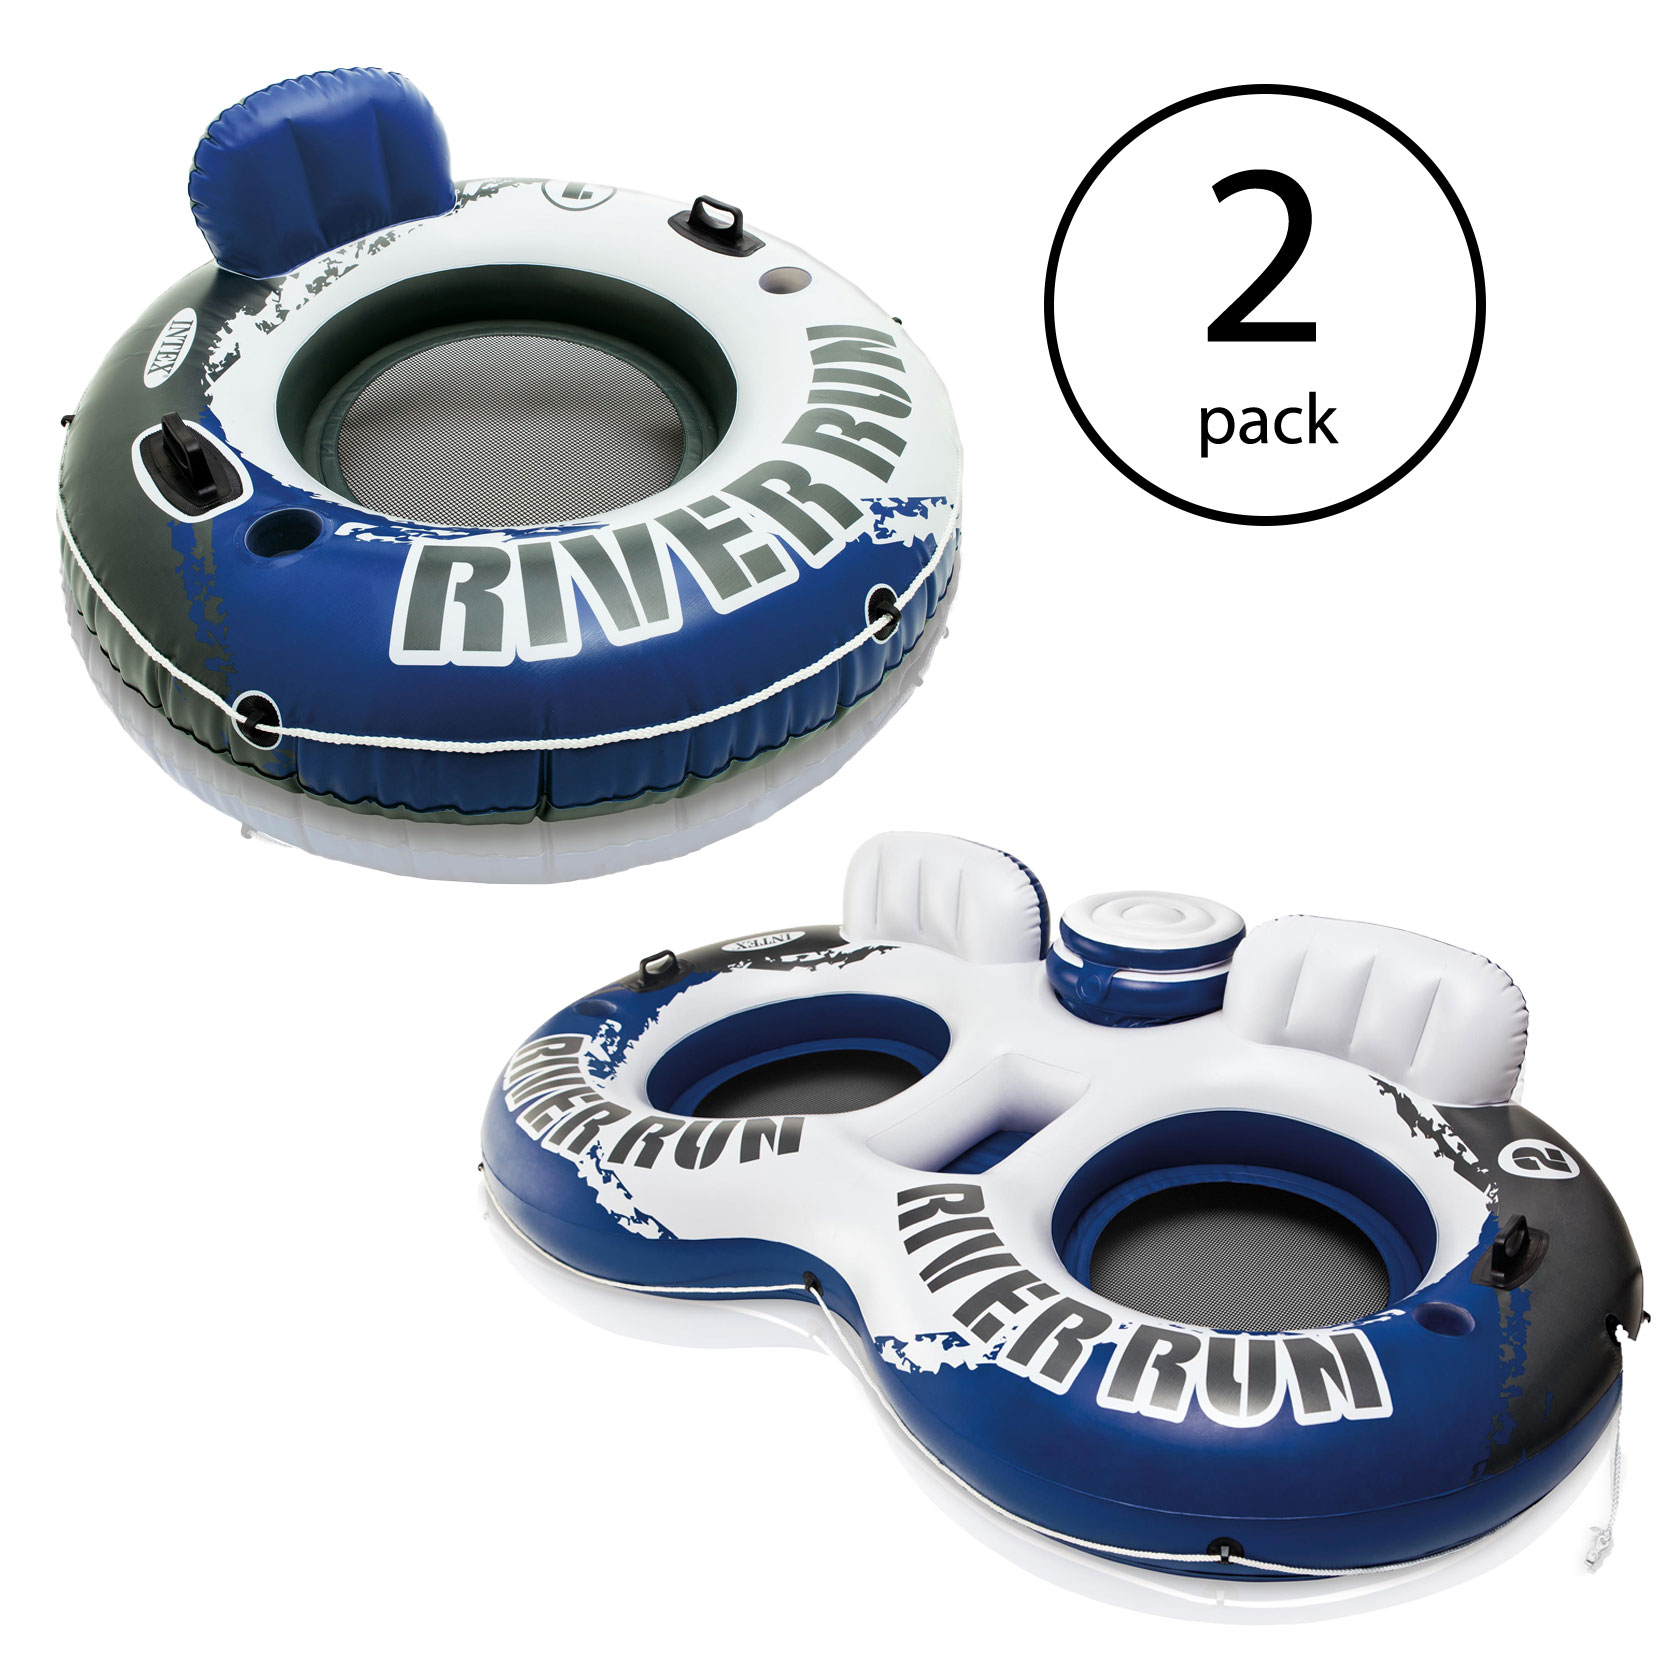 & 1 Rider Floats 2 Pack Intex River Run II Inflatable 2 Person Float 6 Pack